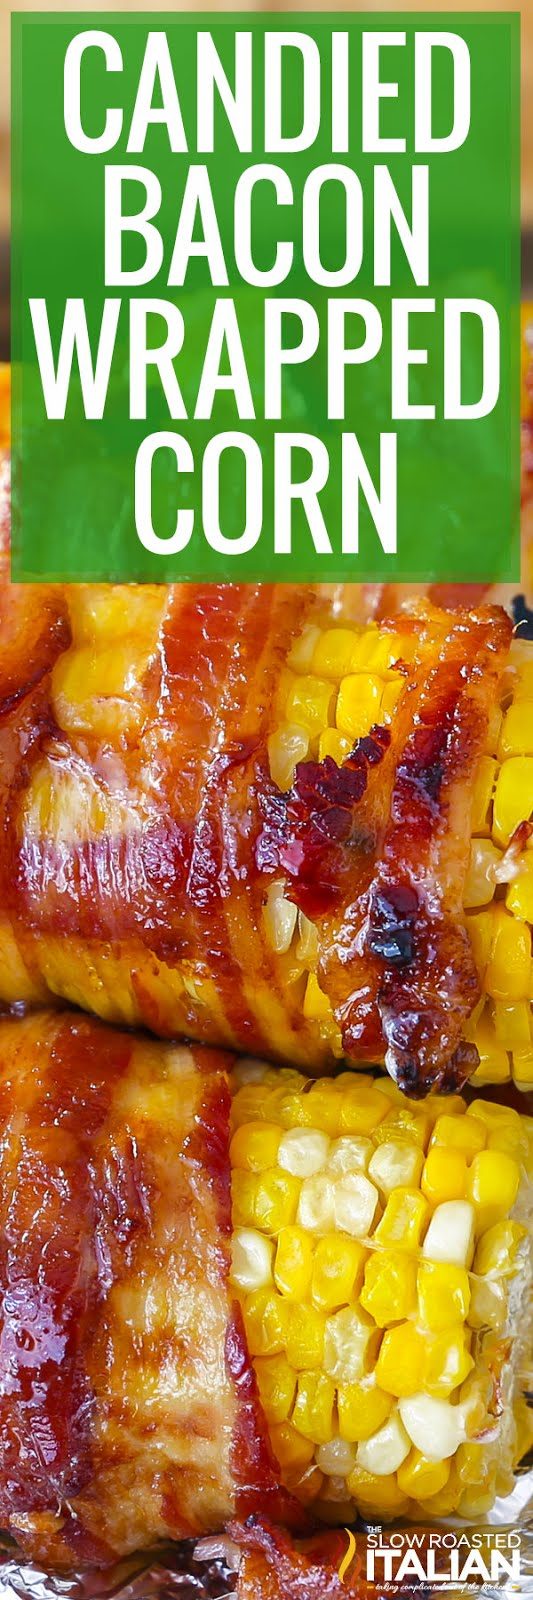 candied-bacon-wrapped-corn-pin-8556165